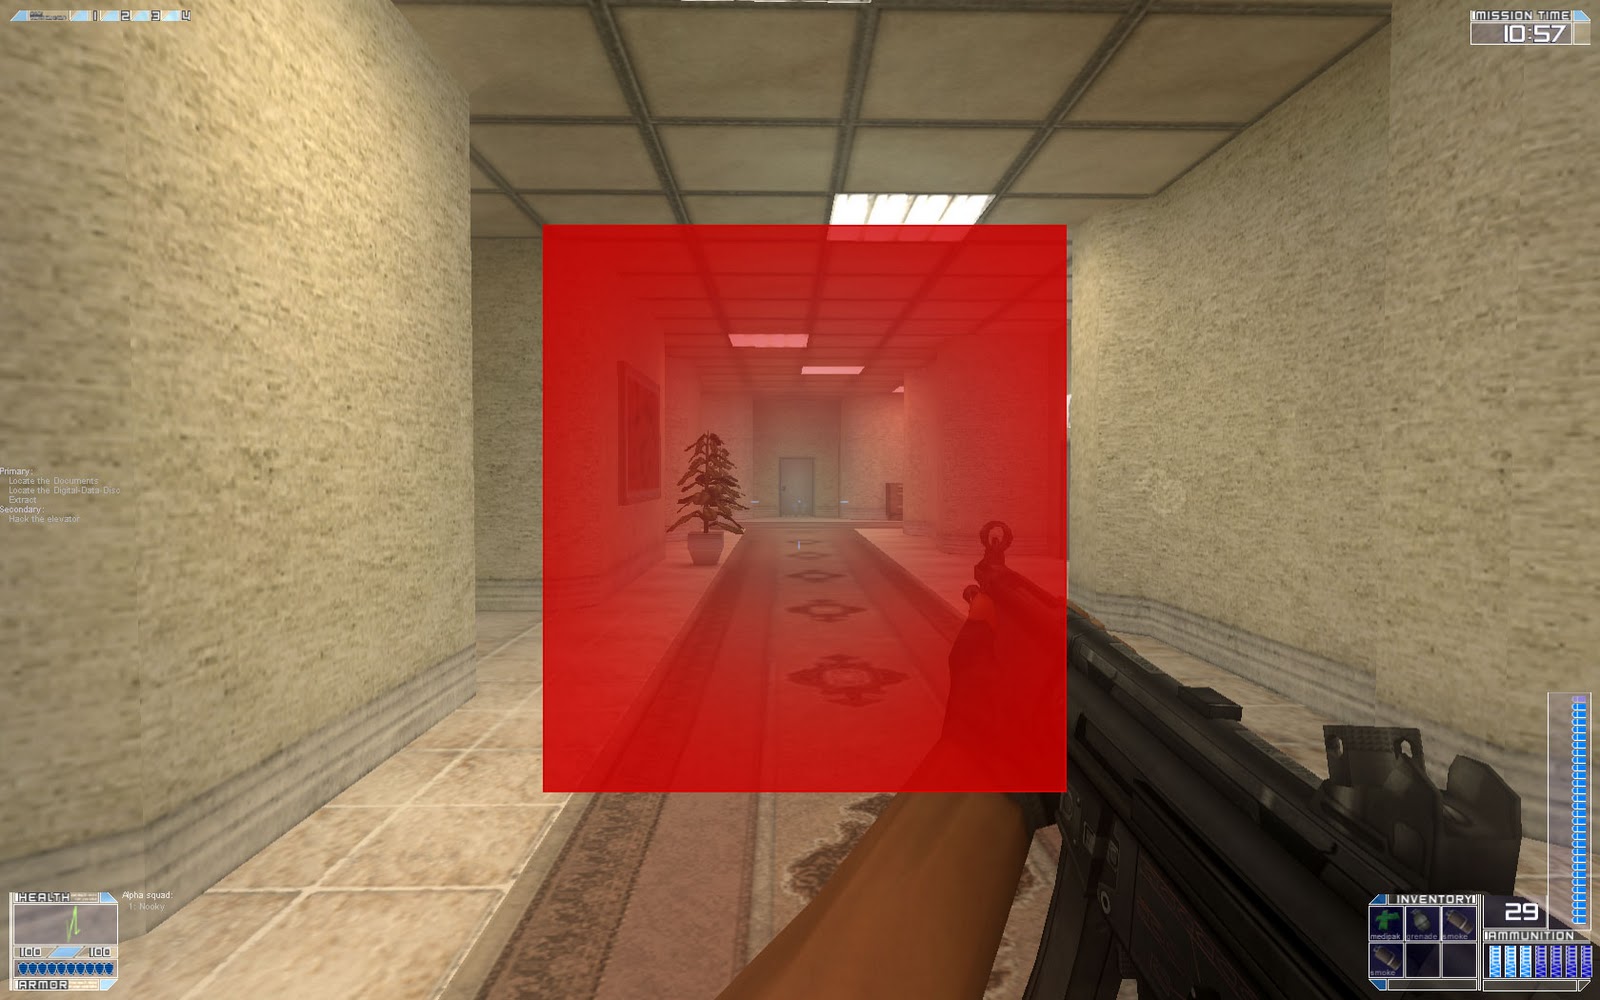 Technical Game Design: Aim systems in First Person Shooters - 